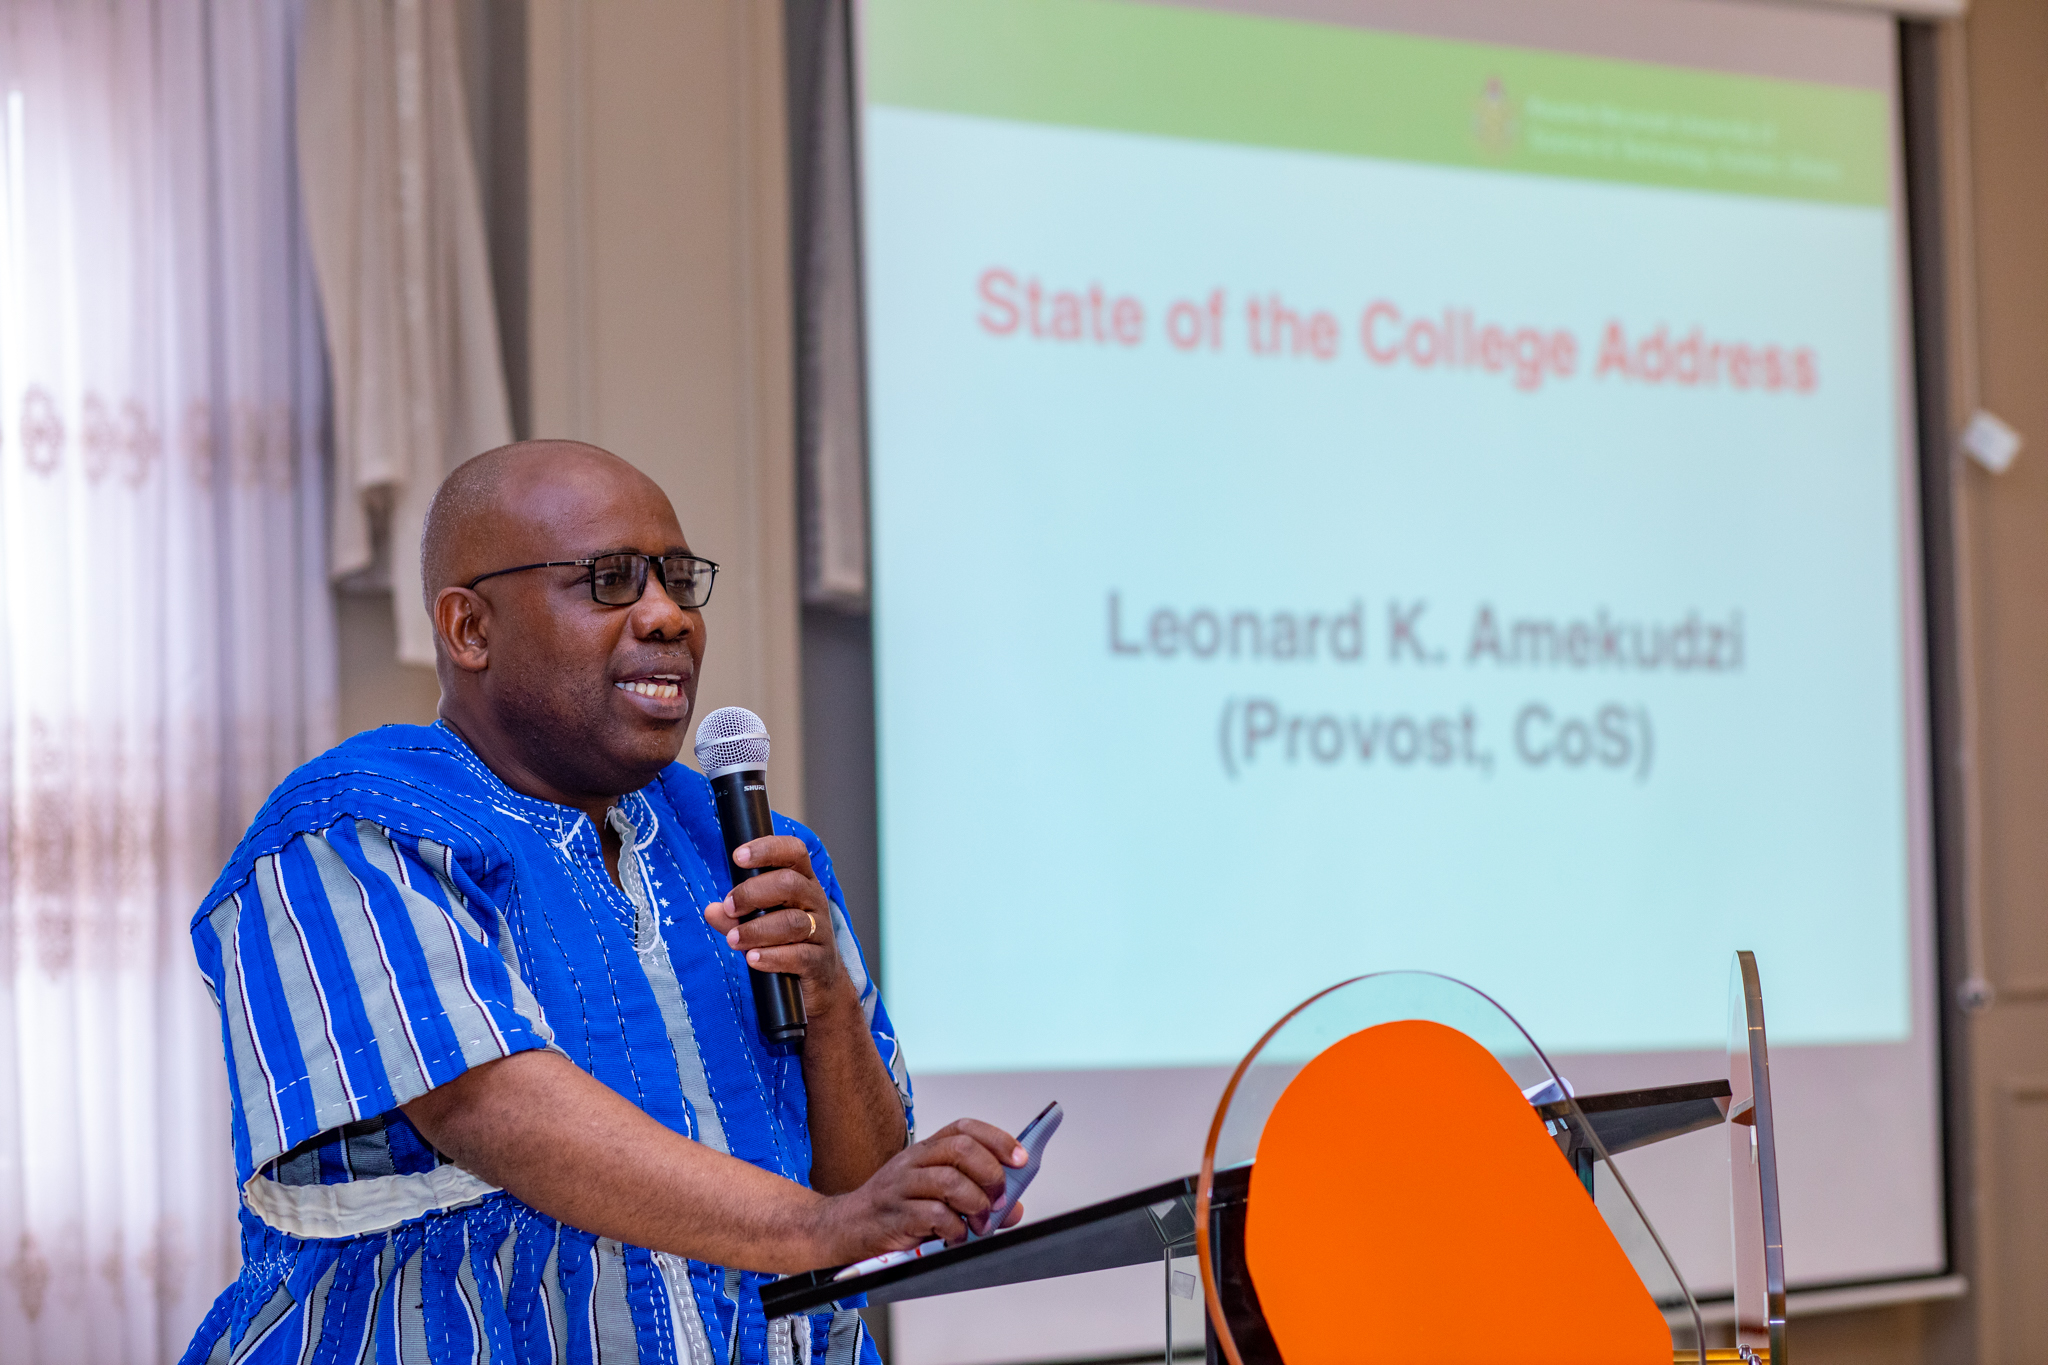 Prof. Leonard K. Amekudzi, Provost-CoS delivering the state of the College address